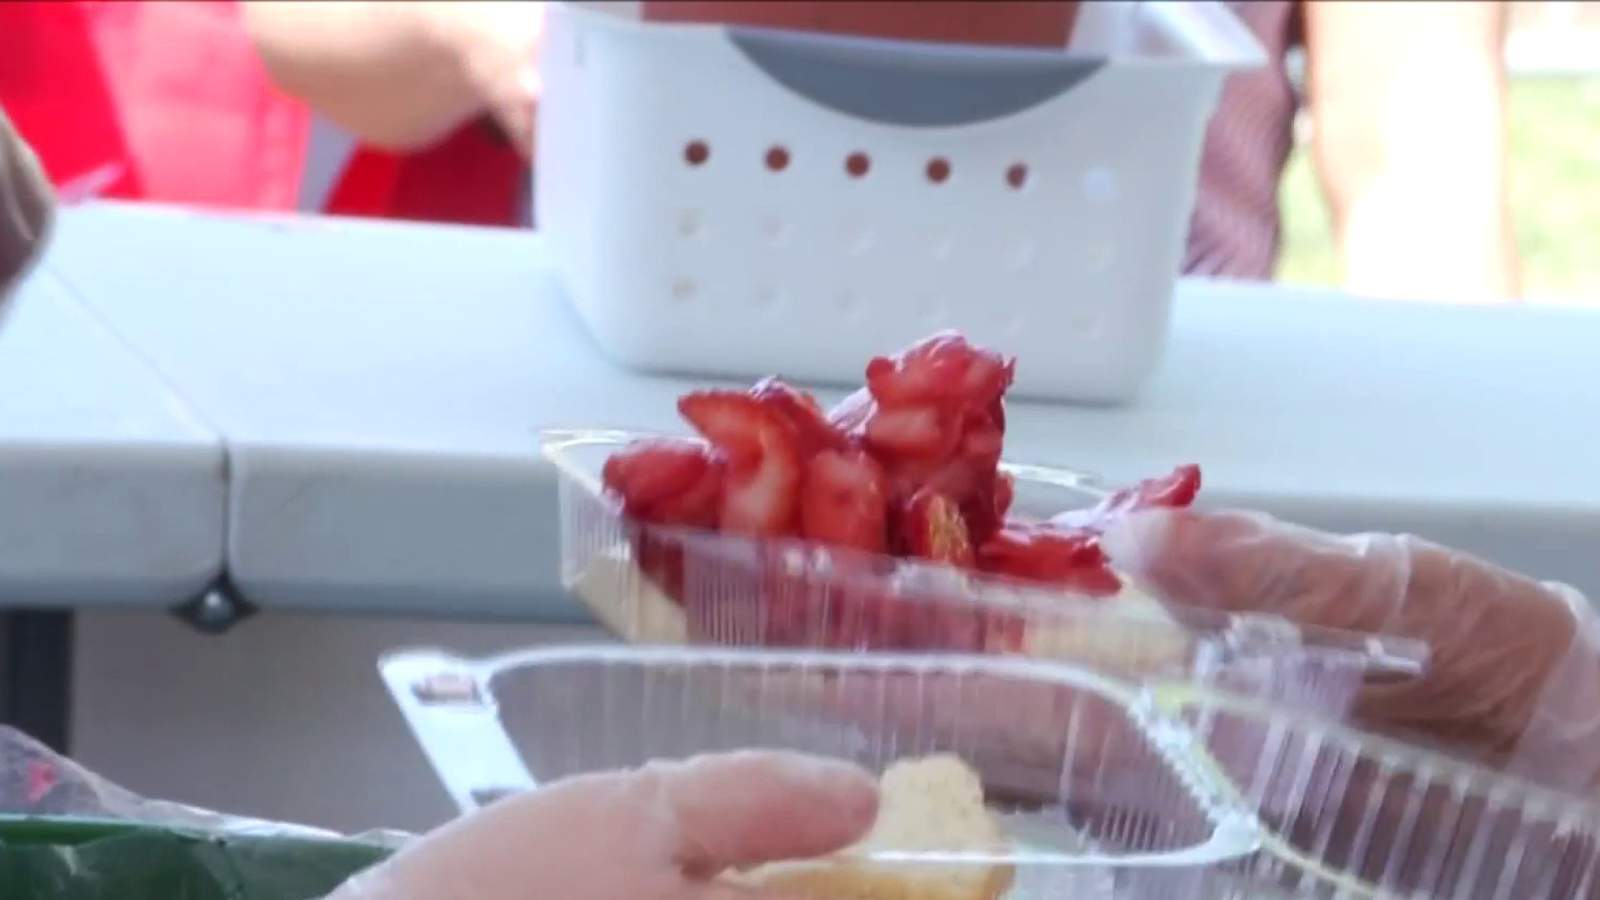 Strawberry Festival returning to Roanoke with a new look this spring